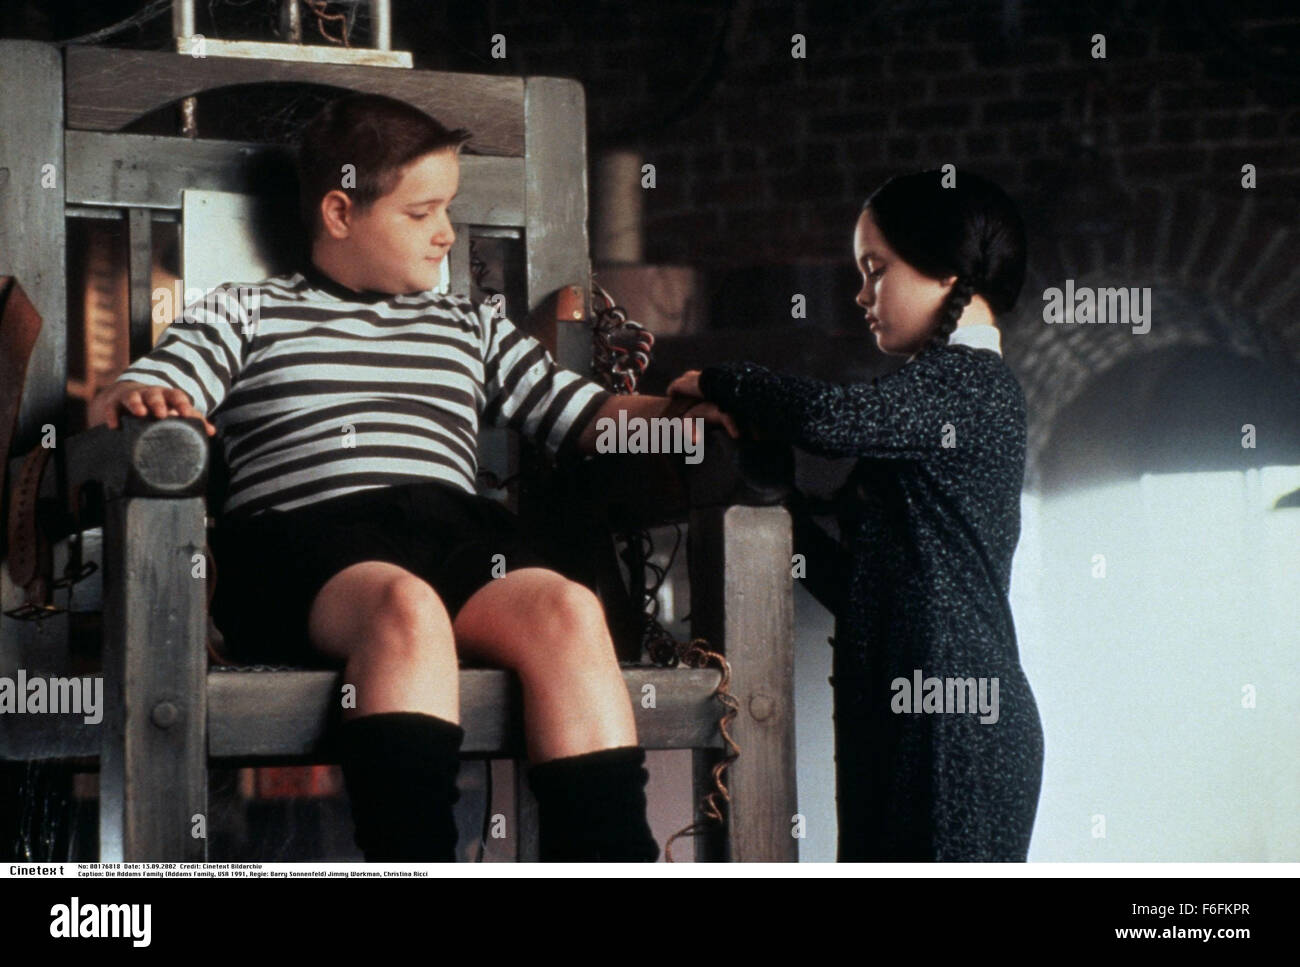 RELEASE DATE: 22 November 1991. MOVIE TITLE: The Addams Family - STUDIO: Paramount Pictures. PLOT: Con artists plan to fleece the eccentric family using an accomplice who claims to be their long lost Uncle Fester. PICTURED: JIMMY WORKMAN as Pugsley Addams and CHRISTINA RICCI as Wednesday Addams. Stock Photo